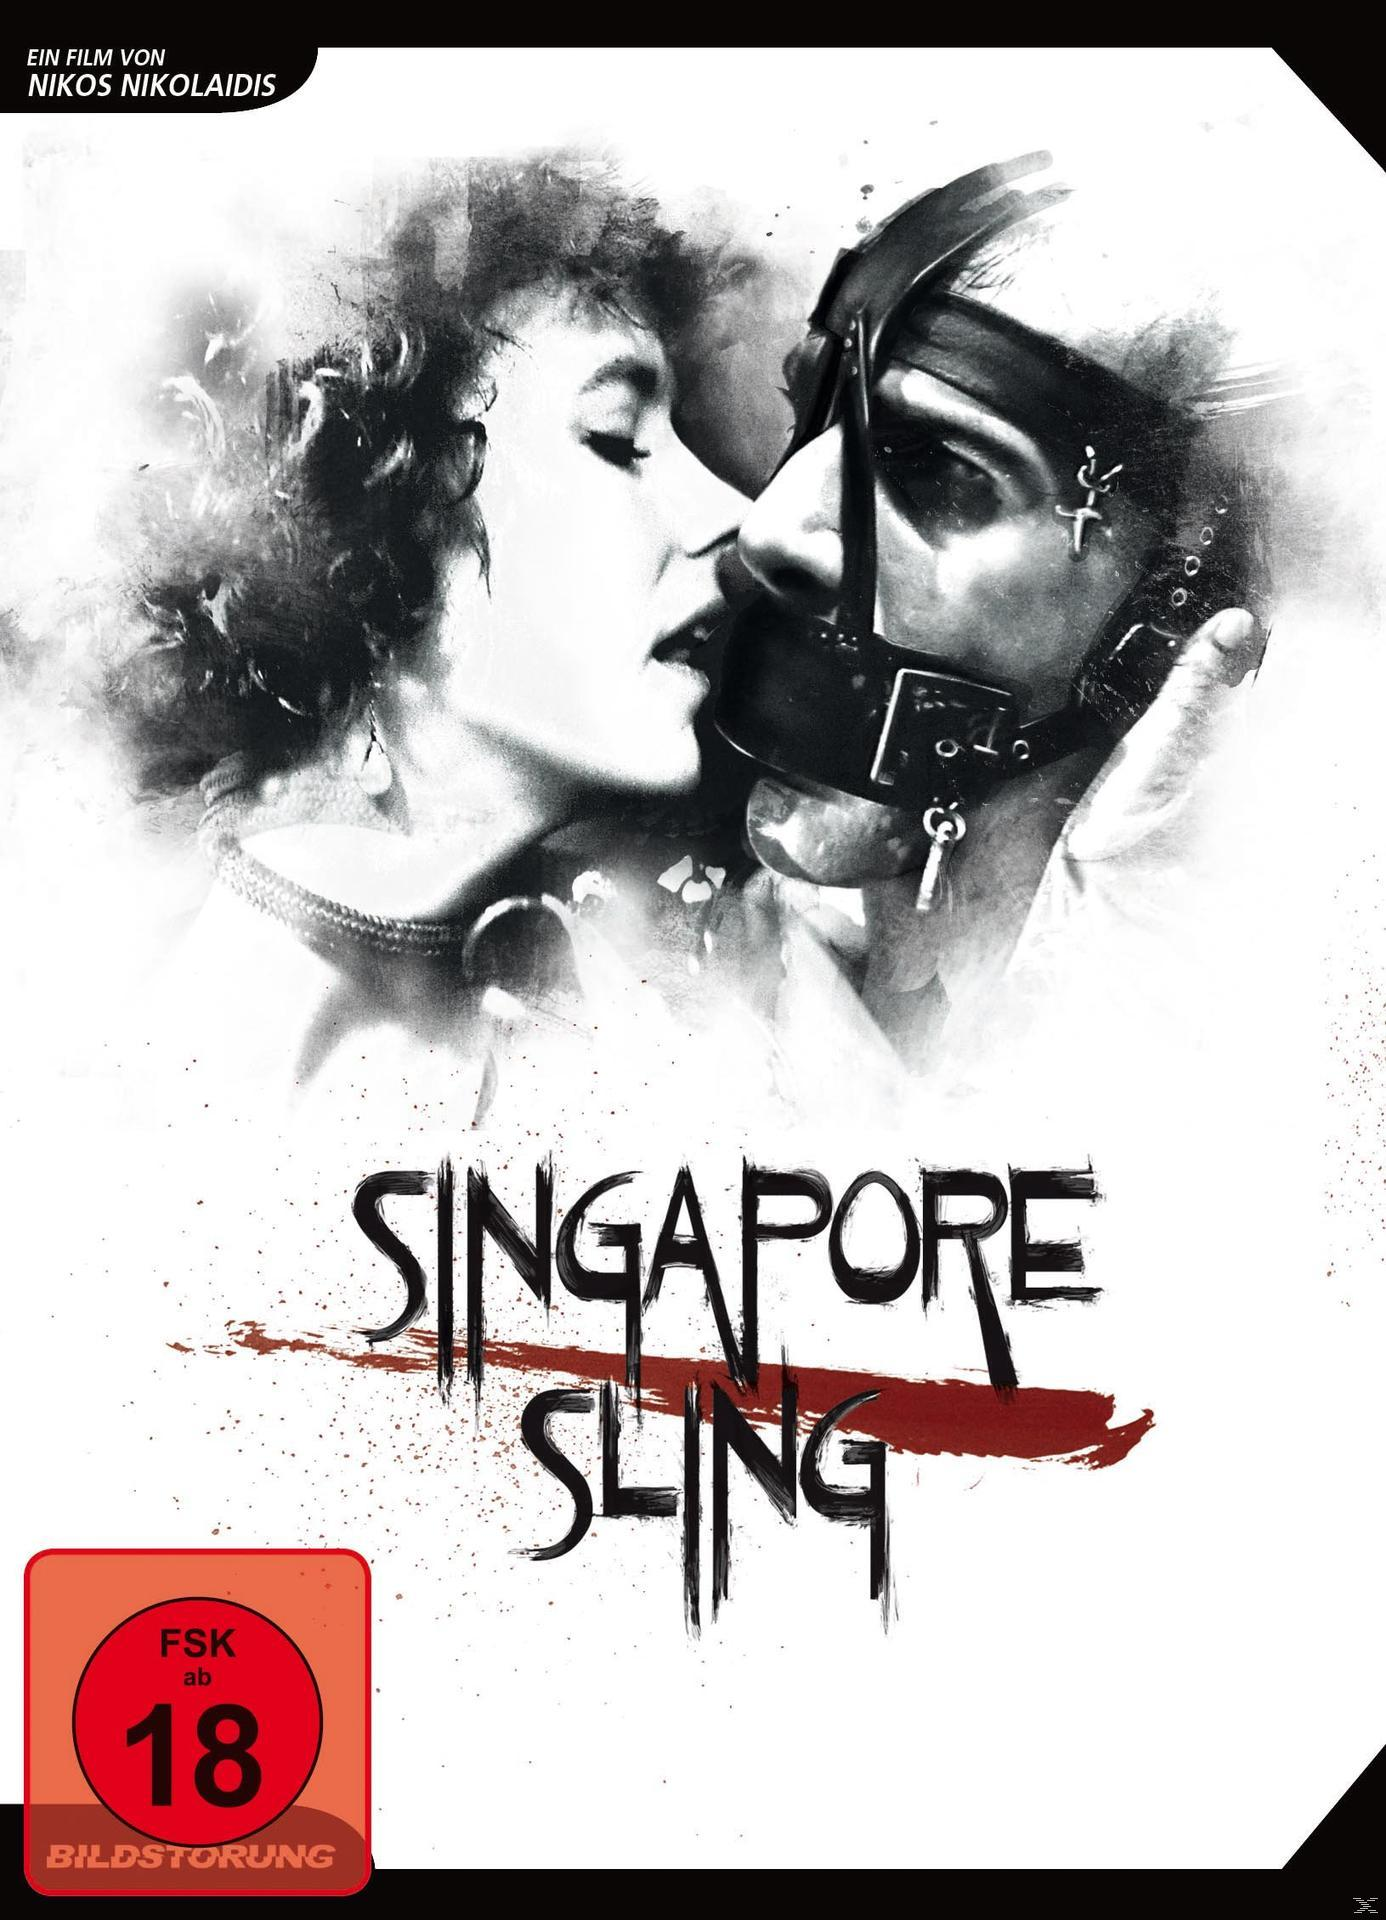 DVD (Special Sling Edition) Singapore